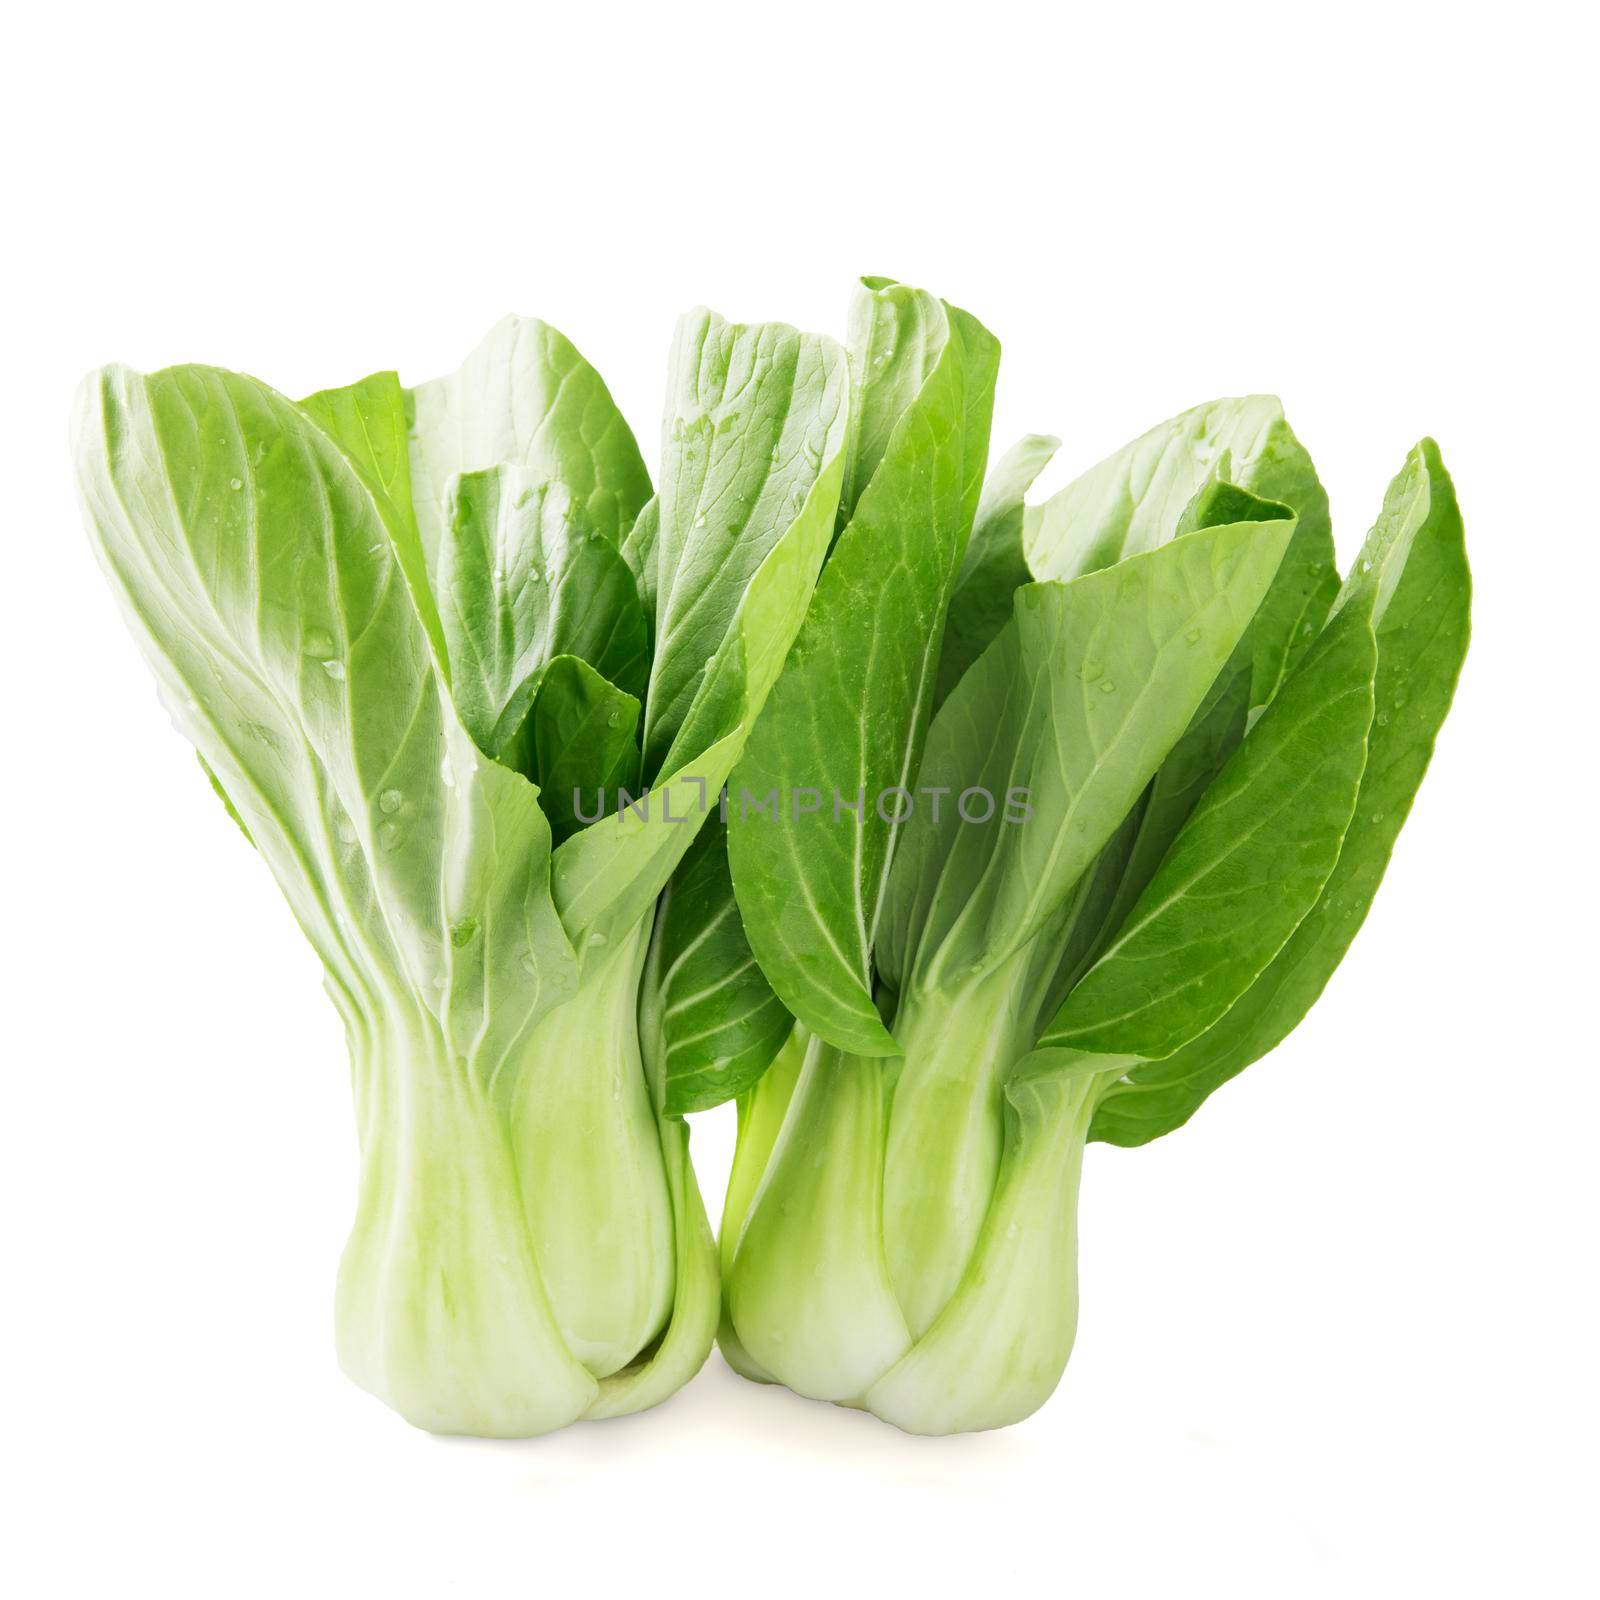 Two bok choy isolated on a white background.